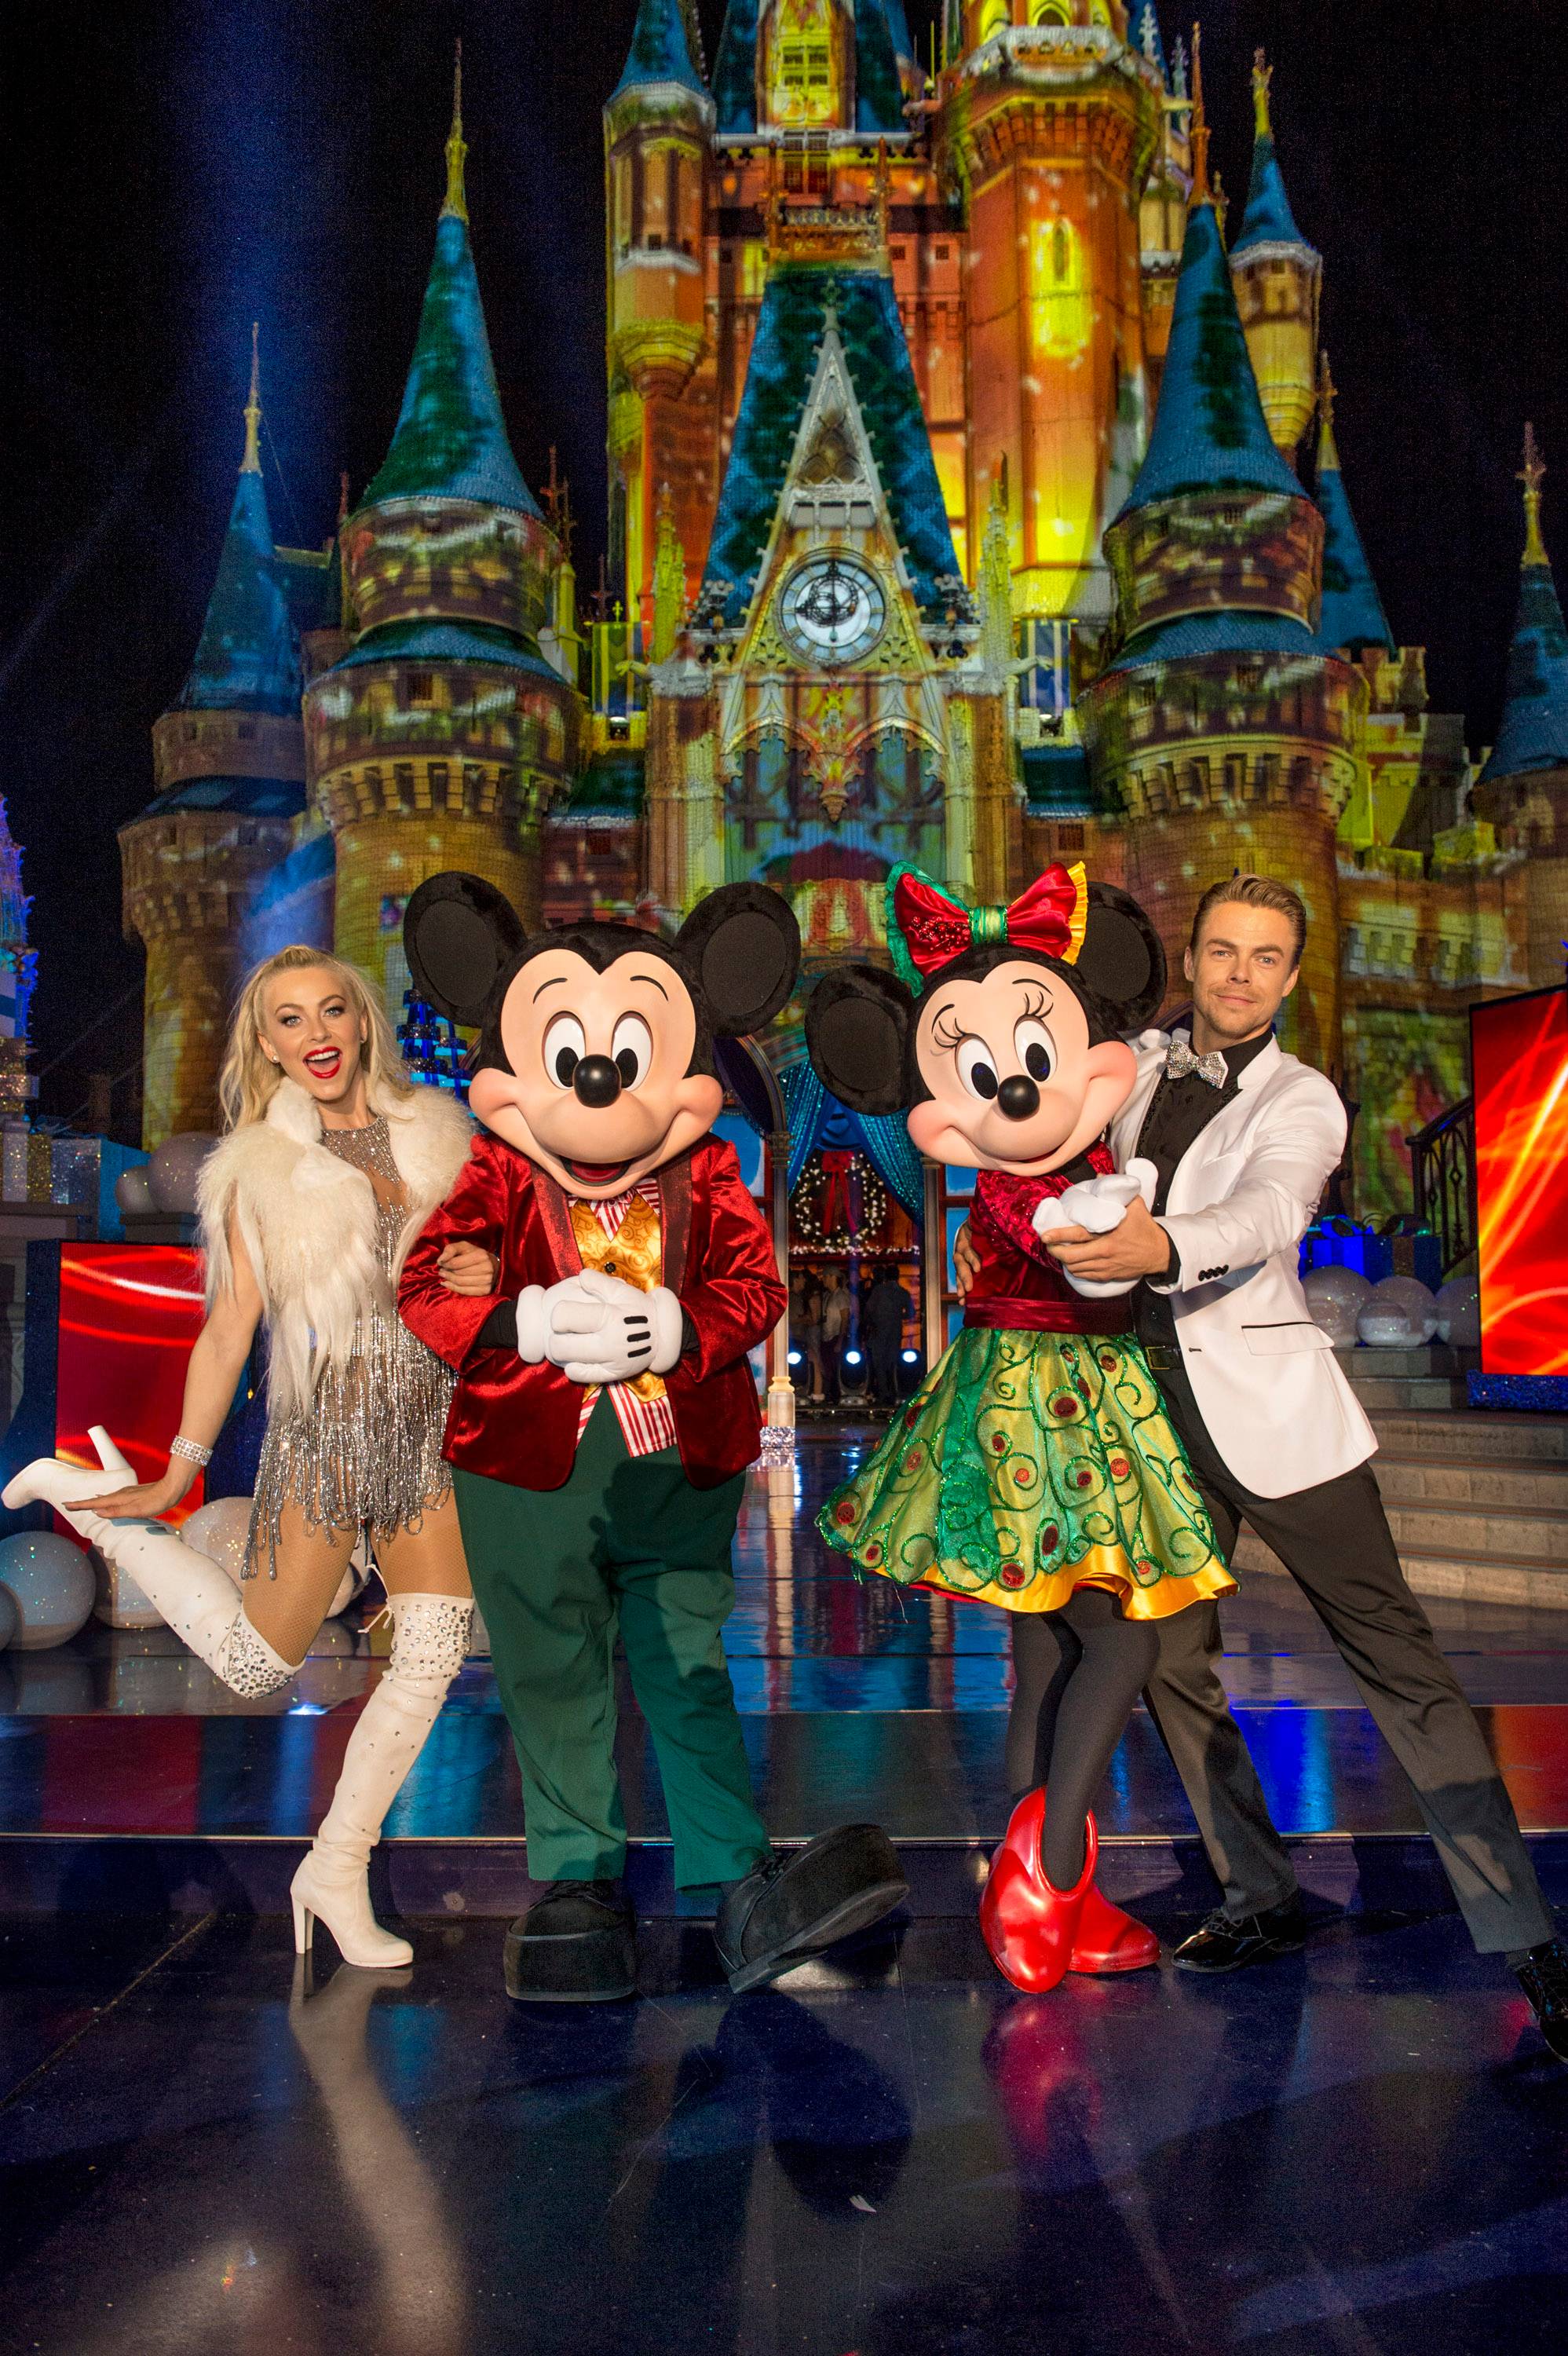 Julianne Hough and pro-dancer Derek Hough pose with Mickey Mouse and Minnie Mouse